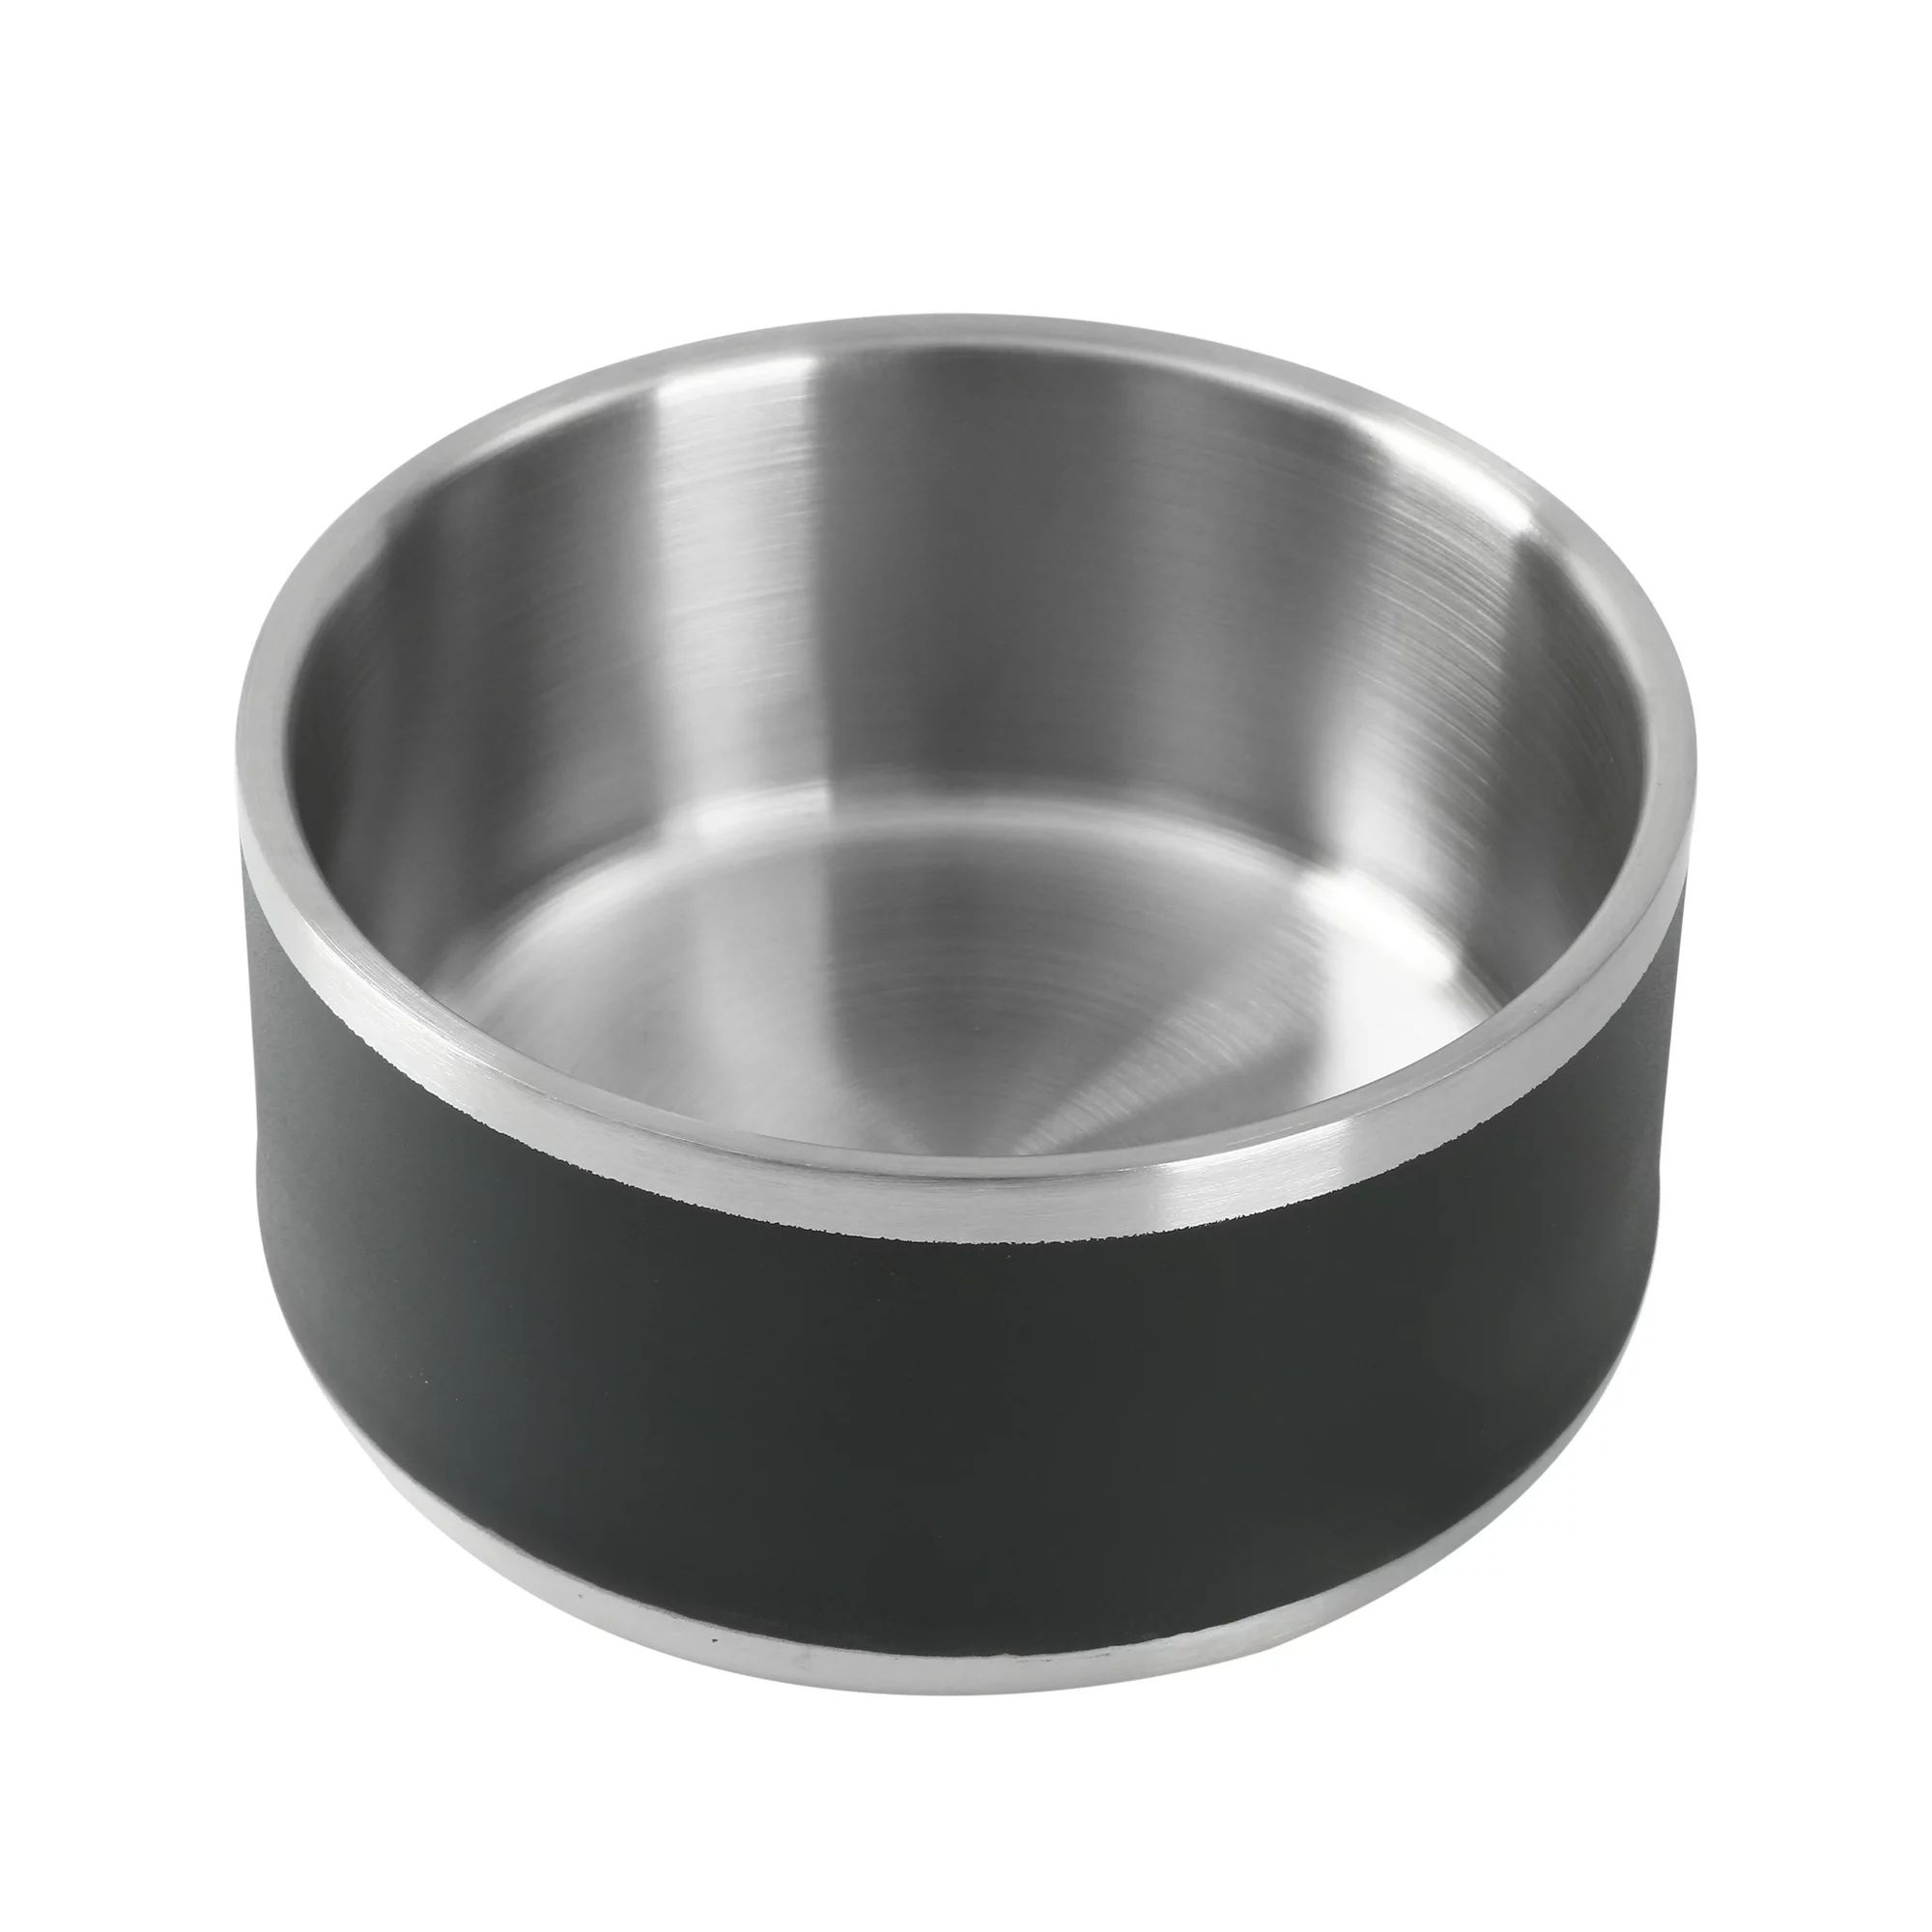 Vibrant Life Stainless Steel Double Wall Dog Bowl, Black, Large | Walmart (US)